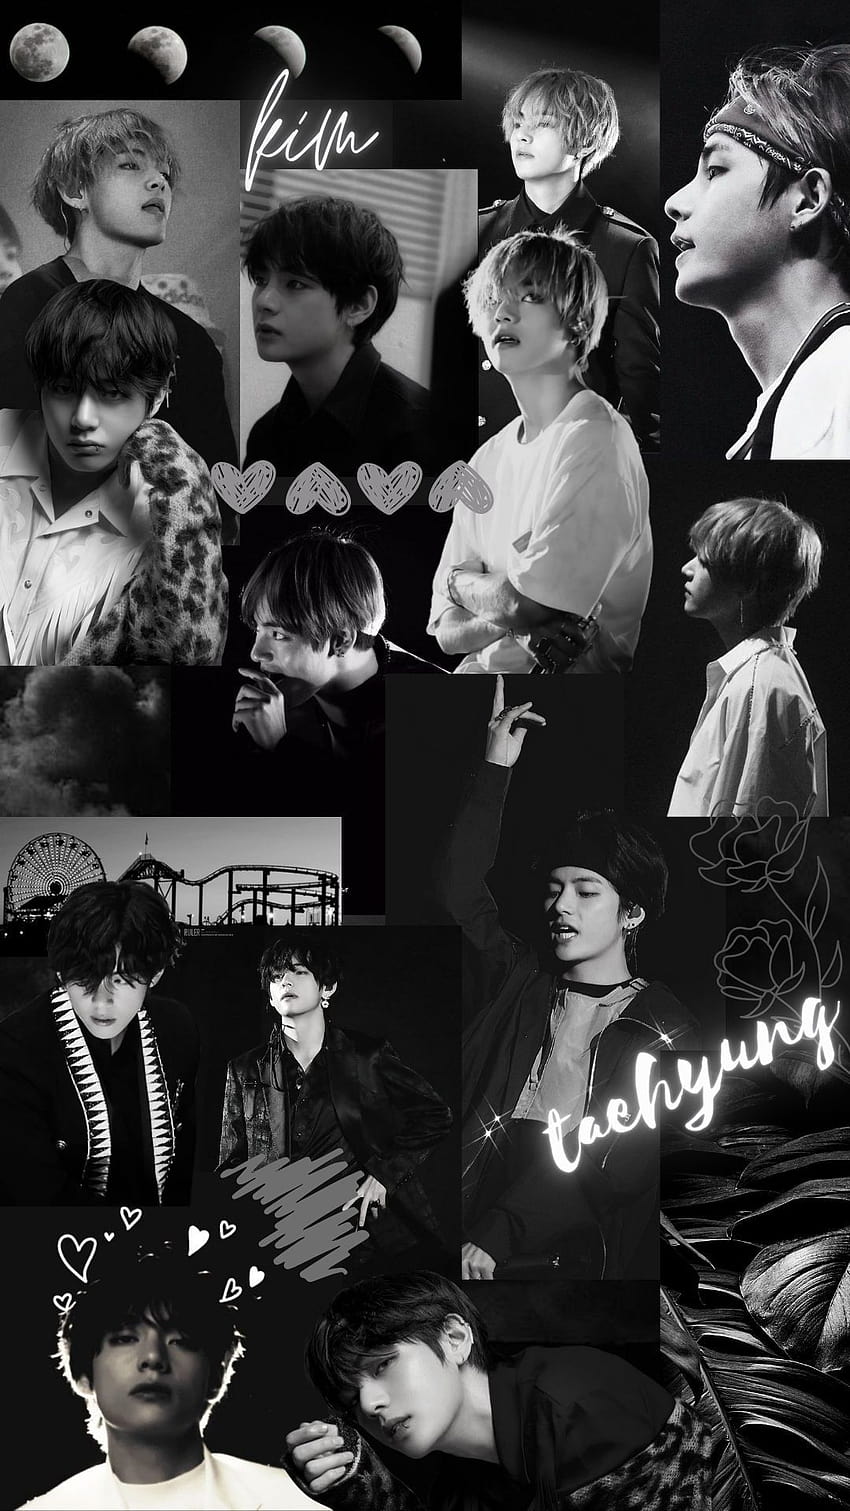 Taehyung Black And White Aesthetic posted by ジョン・アンダーソン, taehyung collage HD電話の壁紙